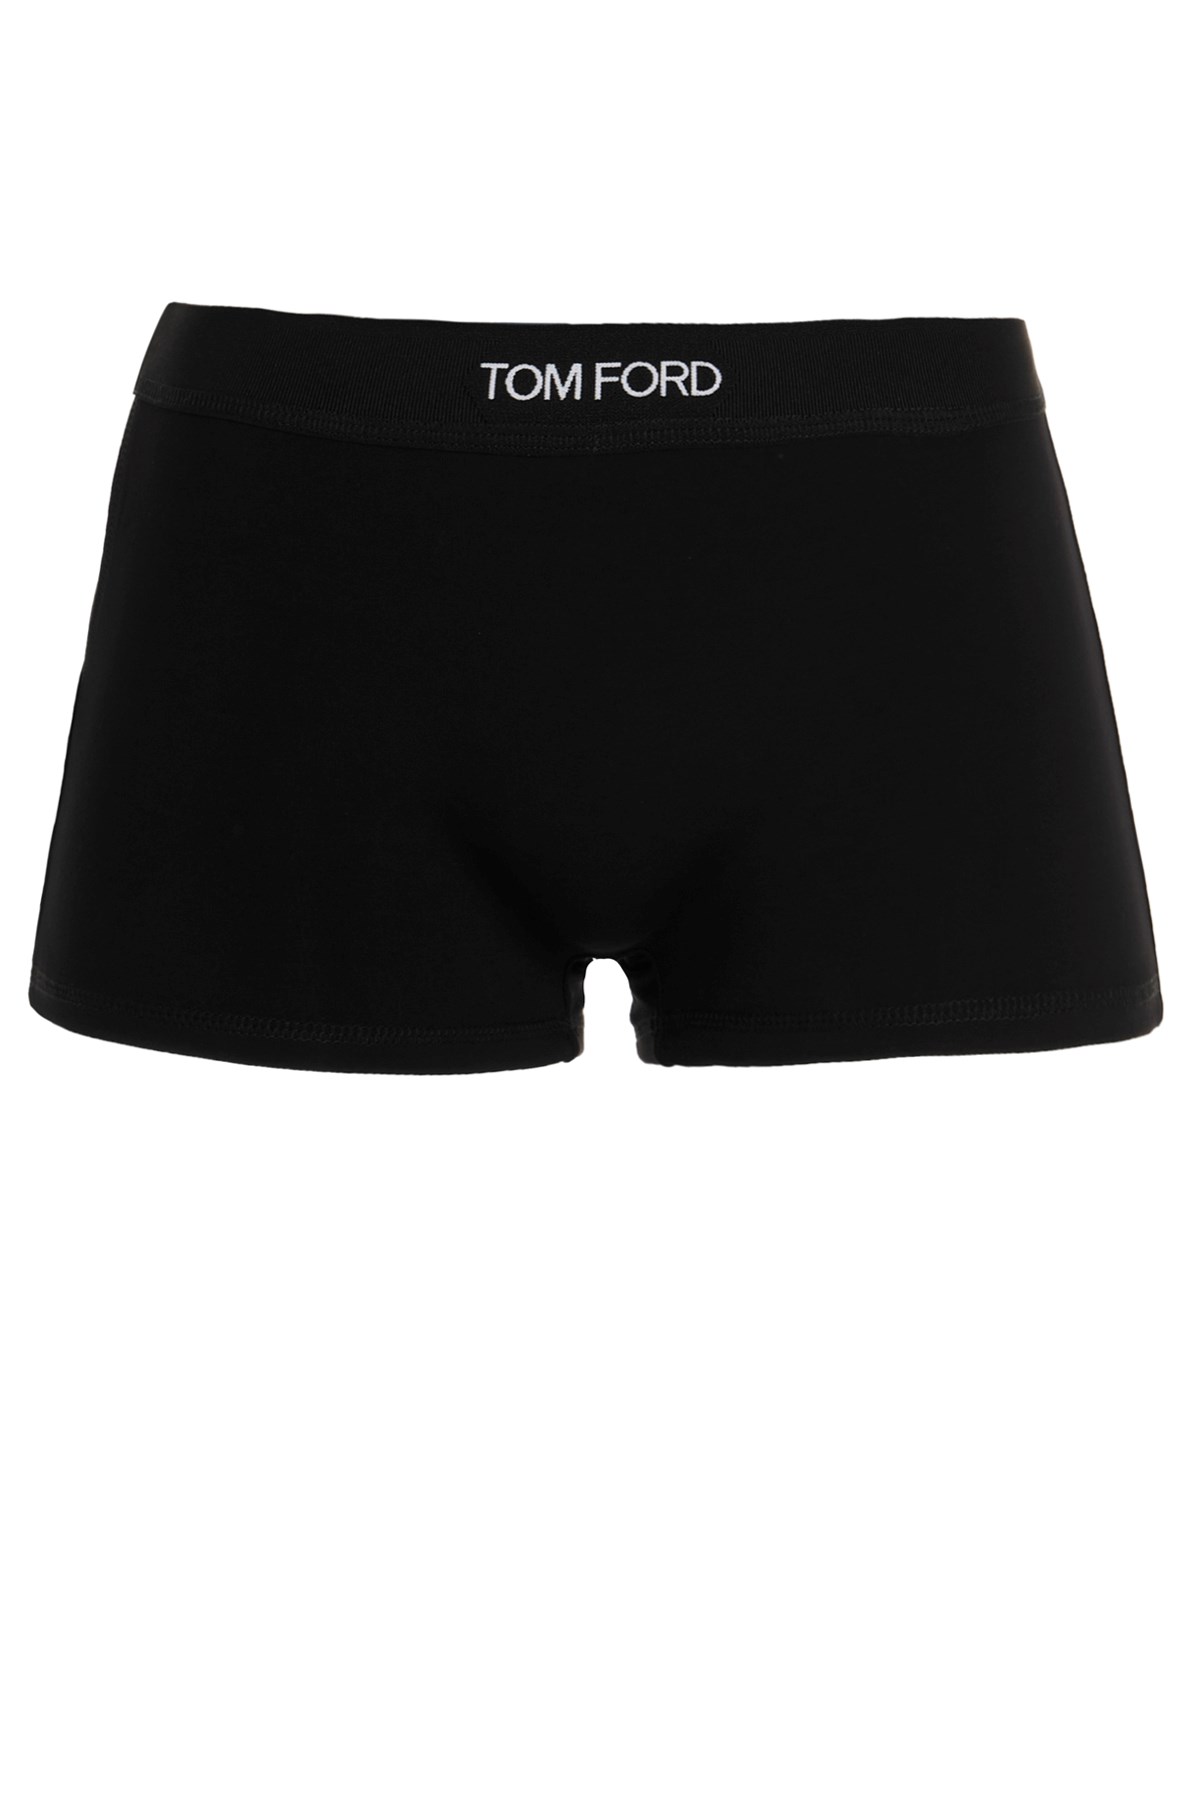 TOM FORD Cut Out Culottes